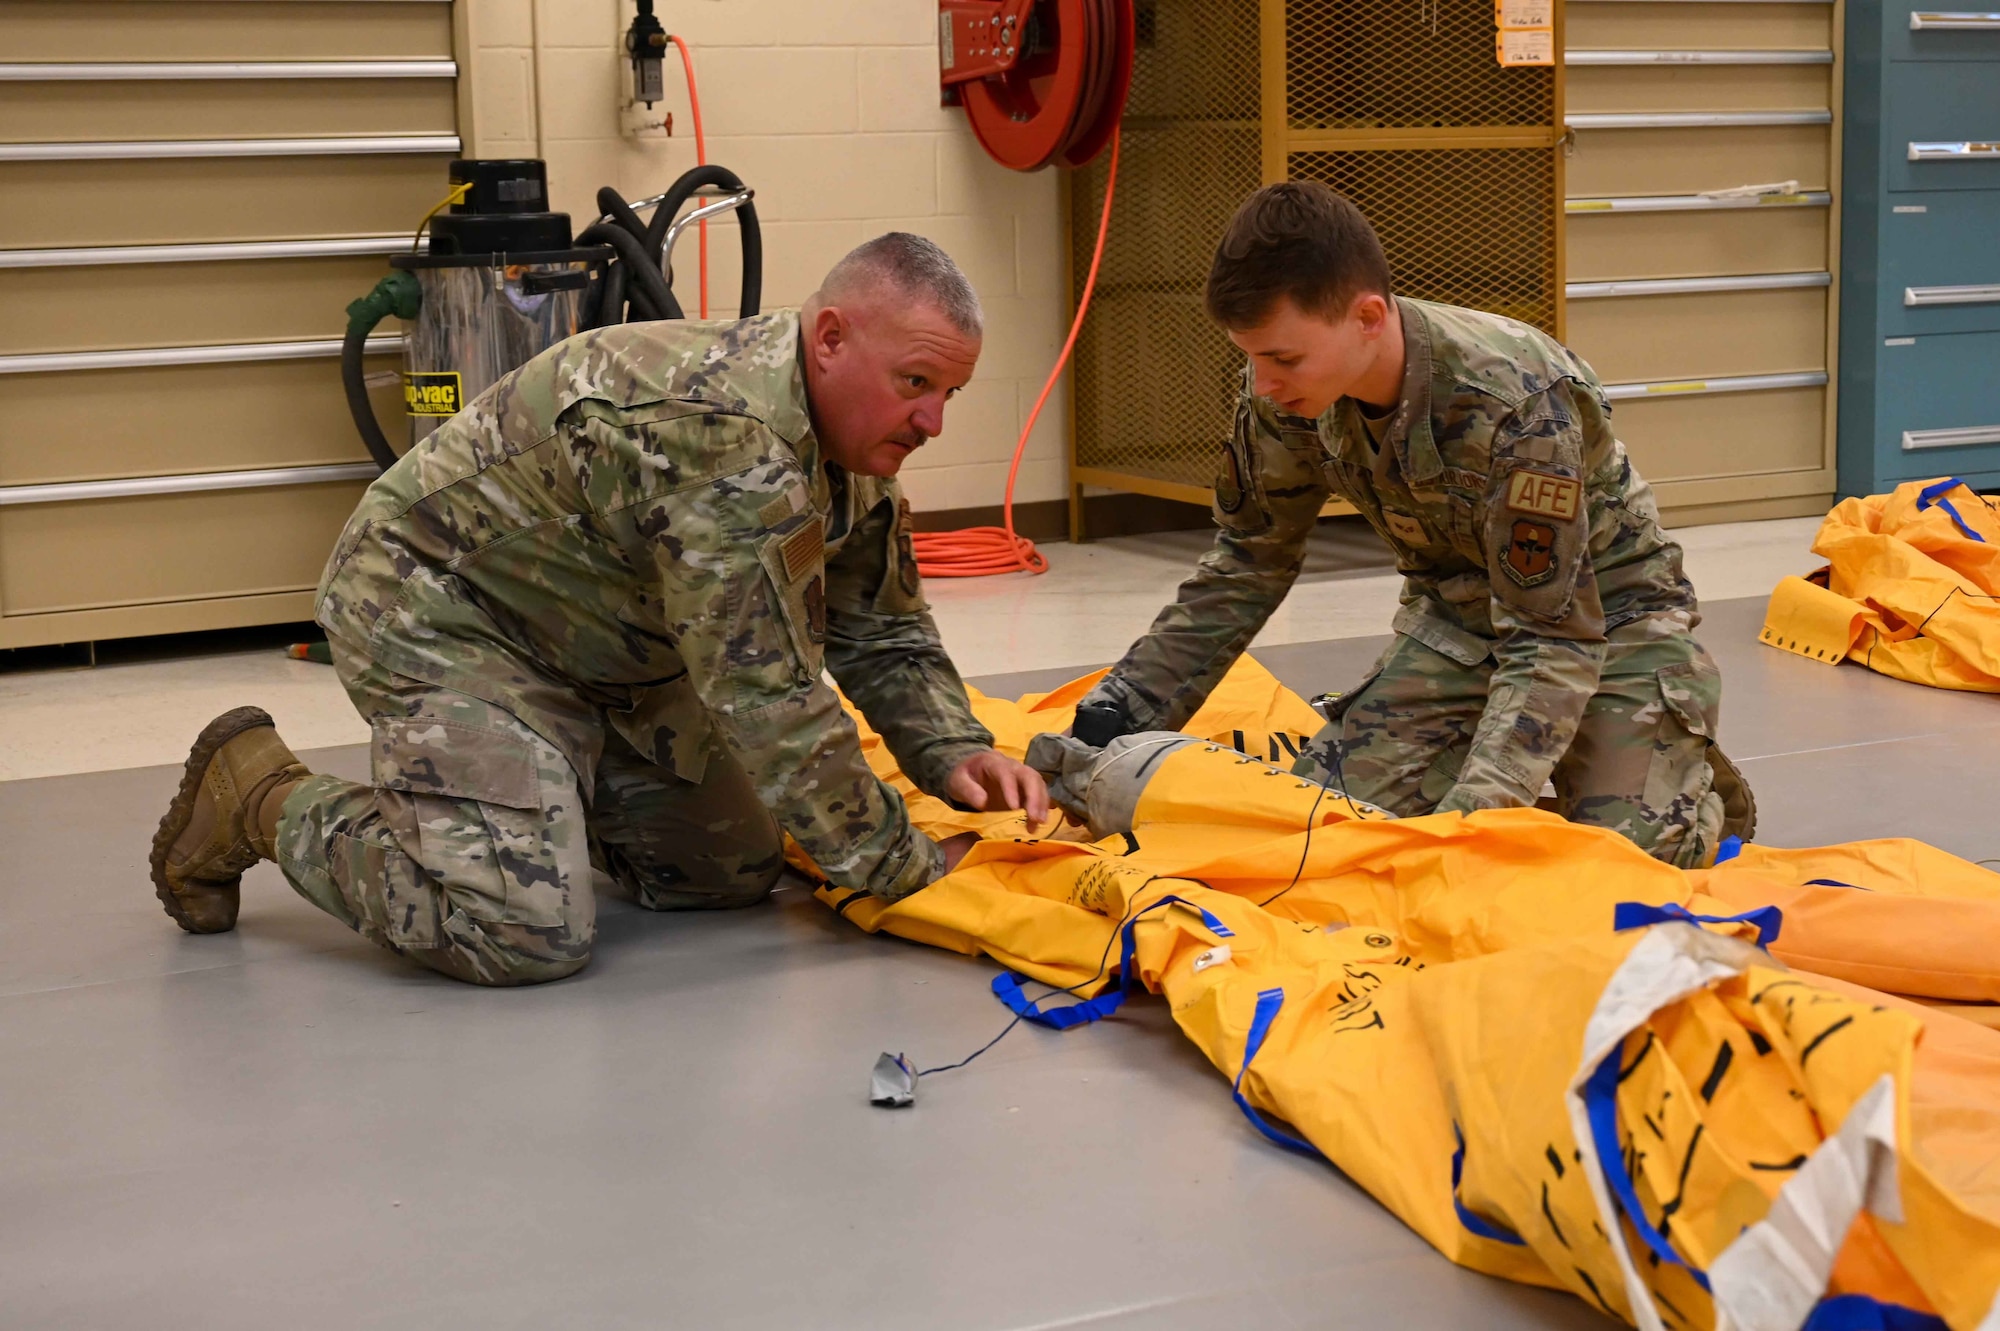 U.S. Air Force Chief Master Sgt. Justin Apticar, left, 19th Air Force command chief, assists Senior Airman Brandon Schulze, right, 97th Operations Support Squadron aircrew flight equipment technician, in rolling up a 46-person raft at Altus Air Force Base (AFB), Oklahoma, March 12, 2024. Apticar toured several squadrons during his two-day visit to interact with Airmen at Altus AFB. (U.S. Air Force photo by Airman 1st Class Kari Degraffenreed)